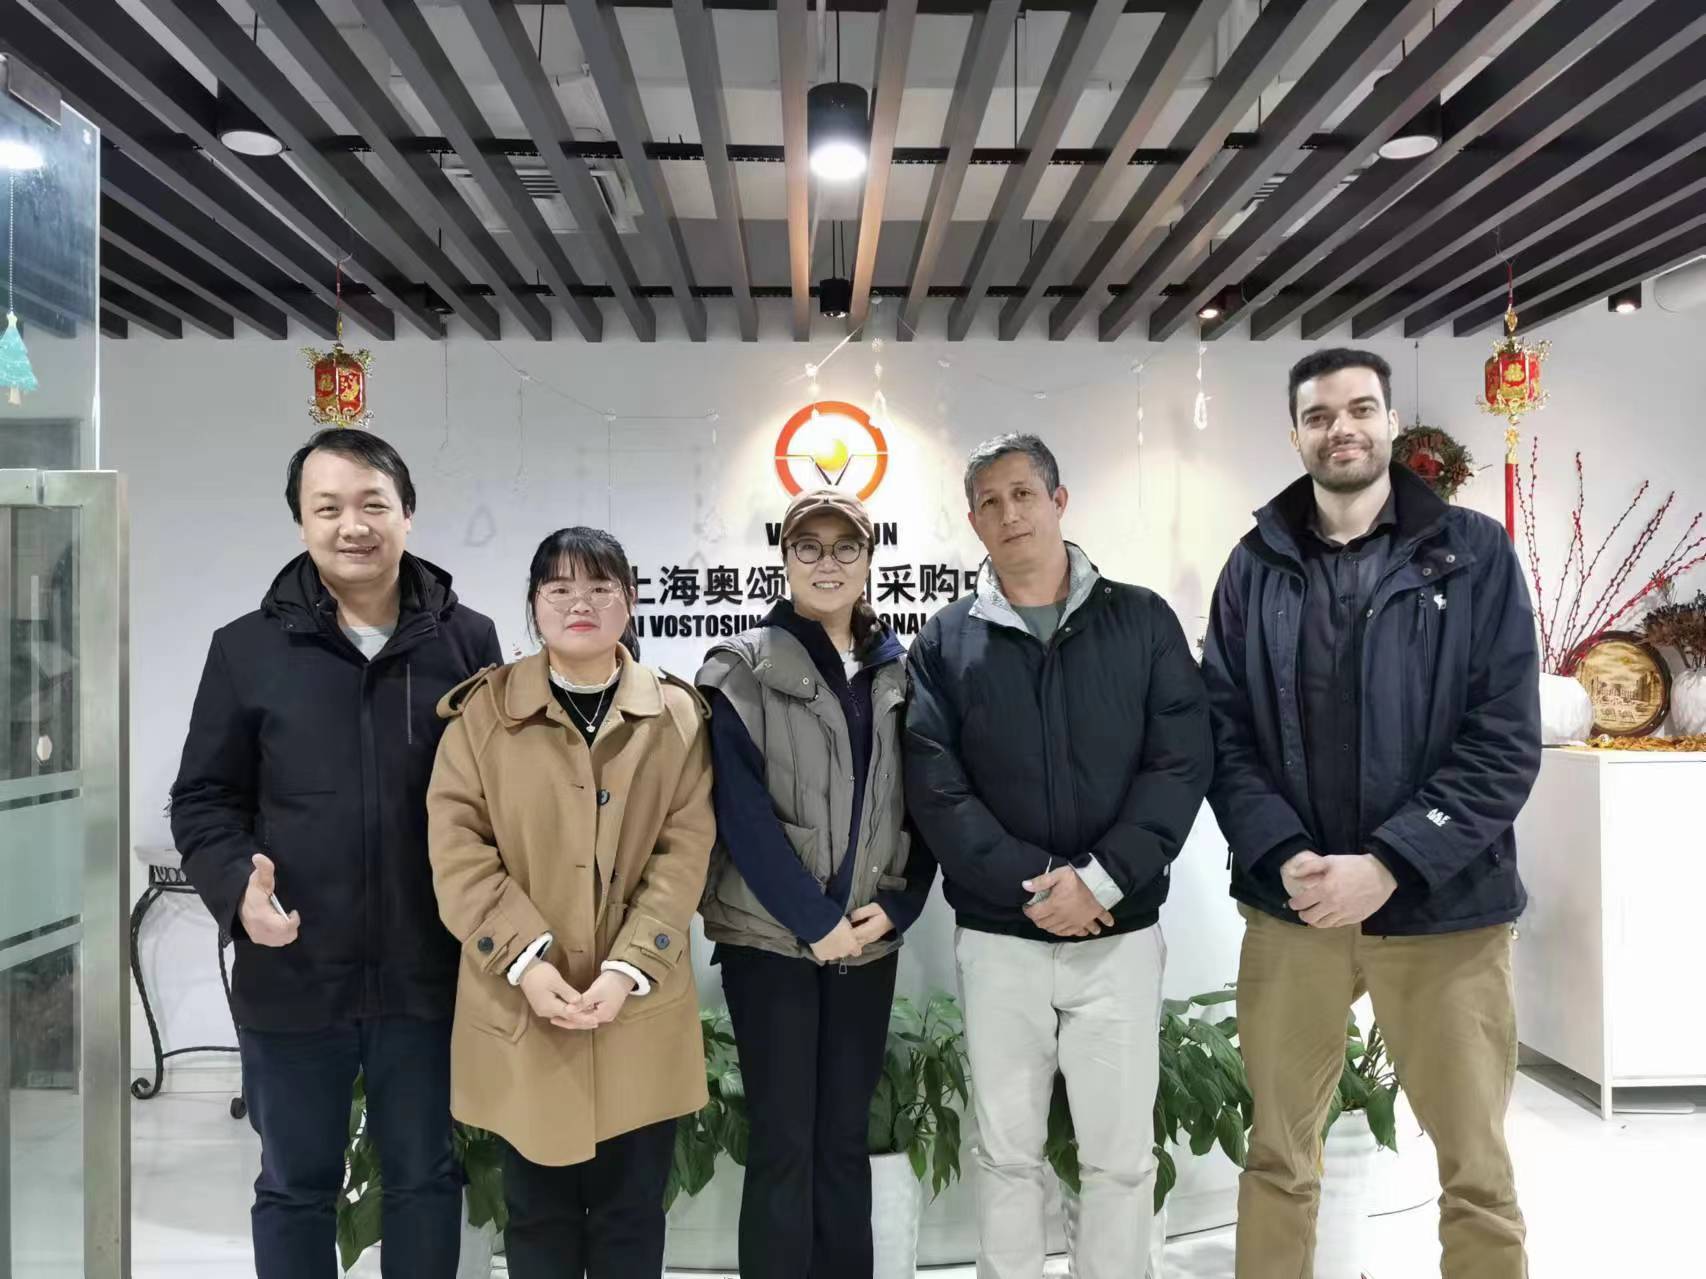 Representatives of the Brazilian Chamber of Commerce in China visited Shanghai Vostosun to discuss the "Future Cooperation Plan" of forklift sales in Brazilian market.